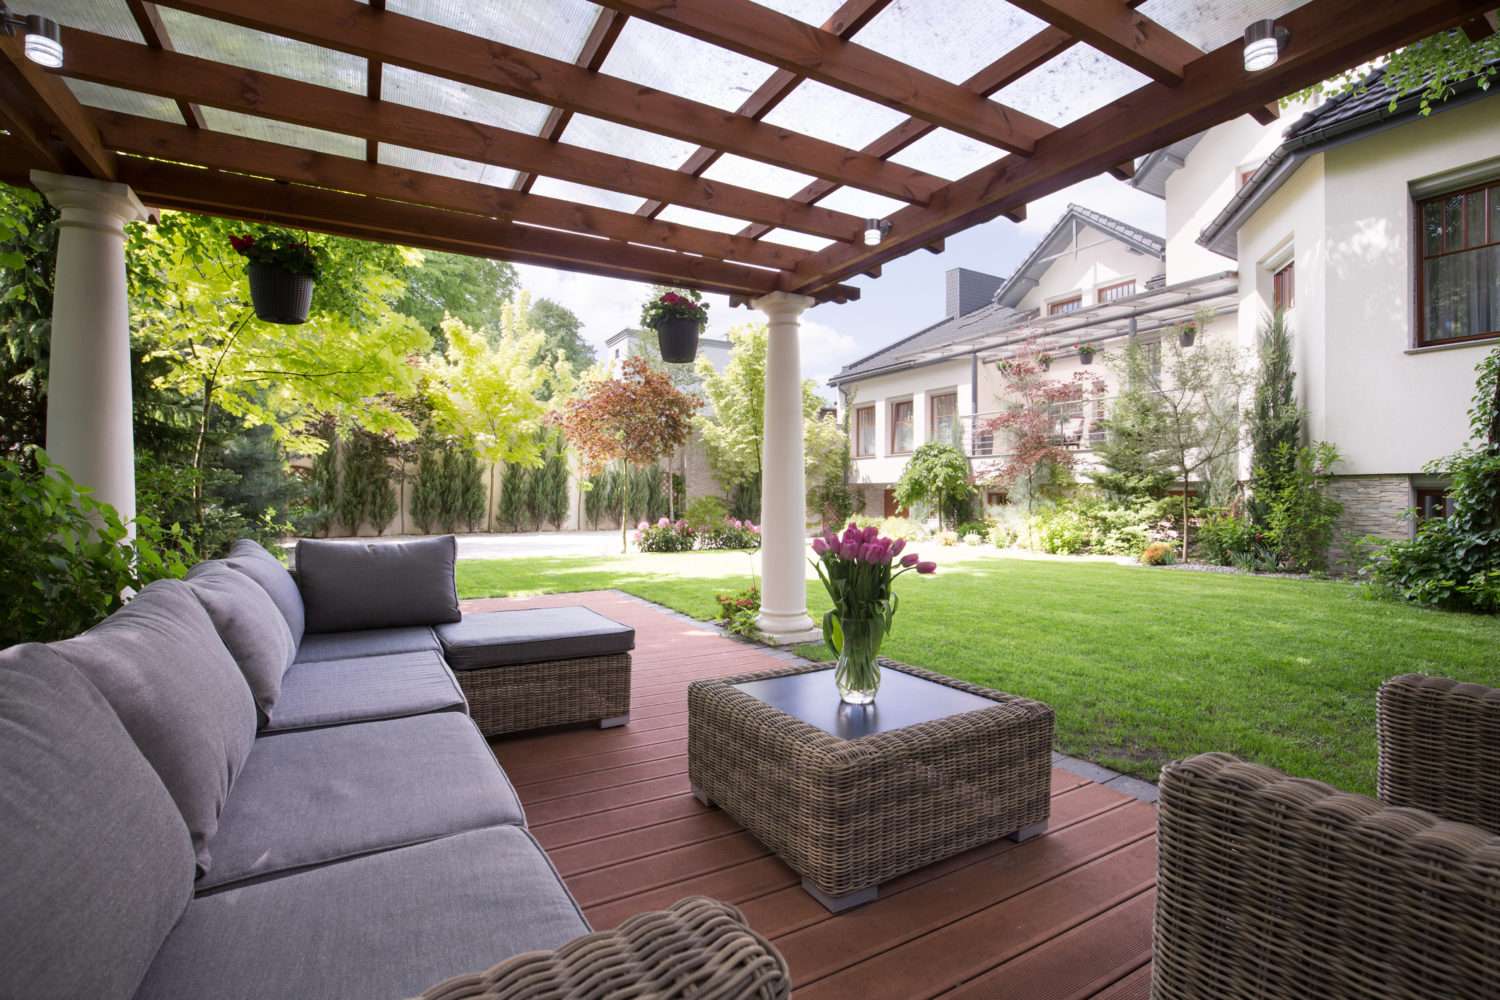 How Much Value Do Patio Covers Add To Your Home?